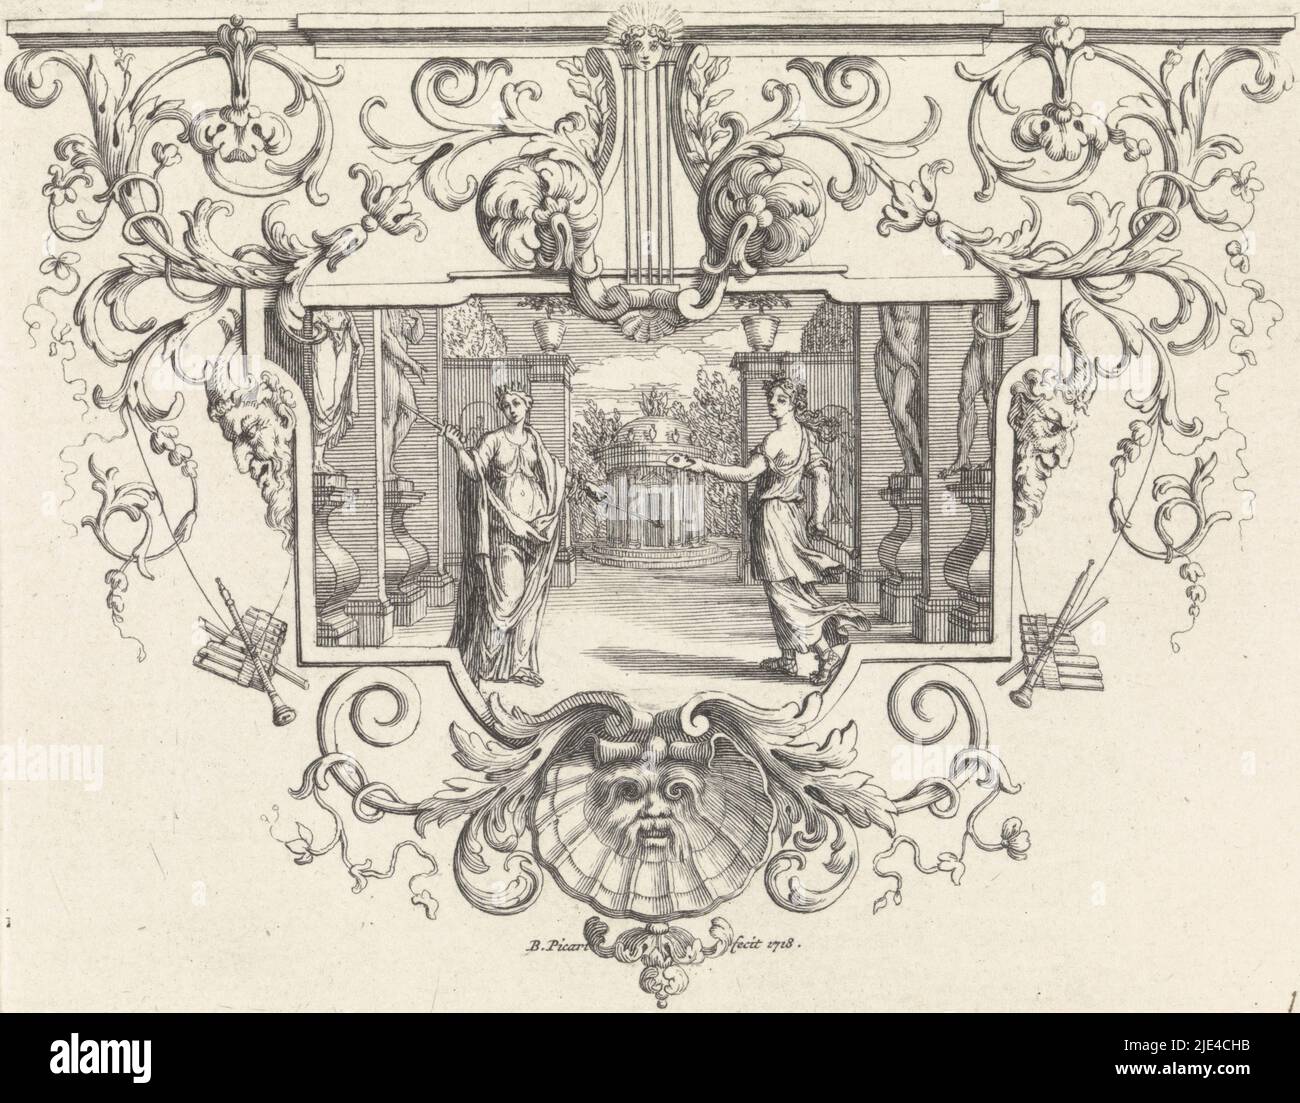 Melpomene and Thalia, Bernard Picart, 1718, On the left is Melpomene, the muse of the tragedy, and on the right is Thalia, the muse of the comedy. In the background a temple. The scene is framed in an ornamental frame., print maker: Bernard Picart, (mentioned on object), Amsterdam, 1718, paper, etching, engraving, h 103 mm × w 133 mm Stock Photo